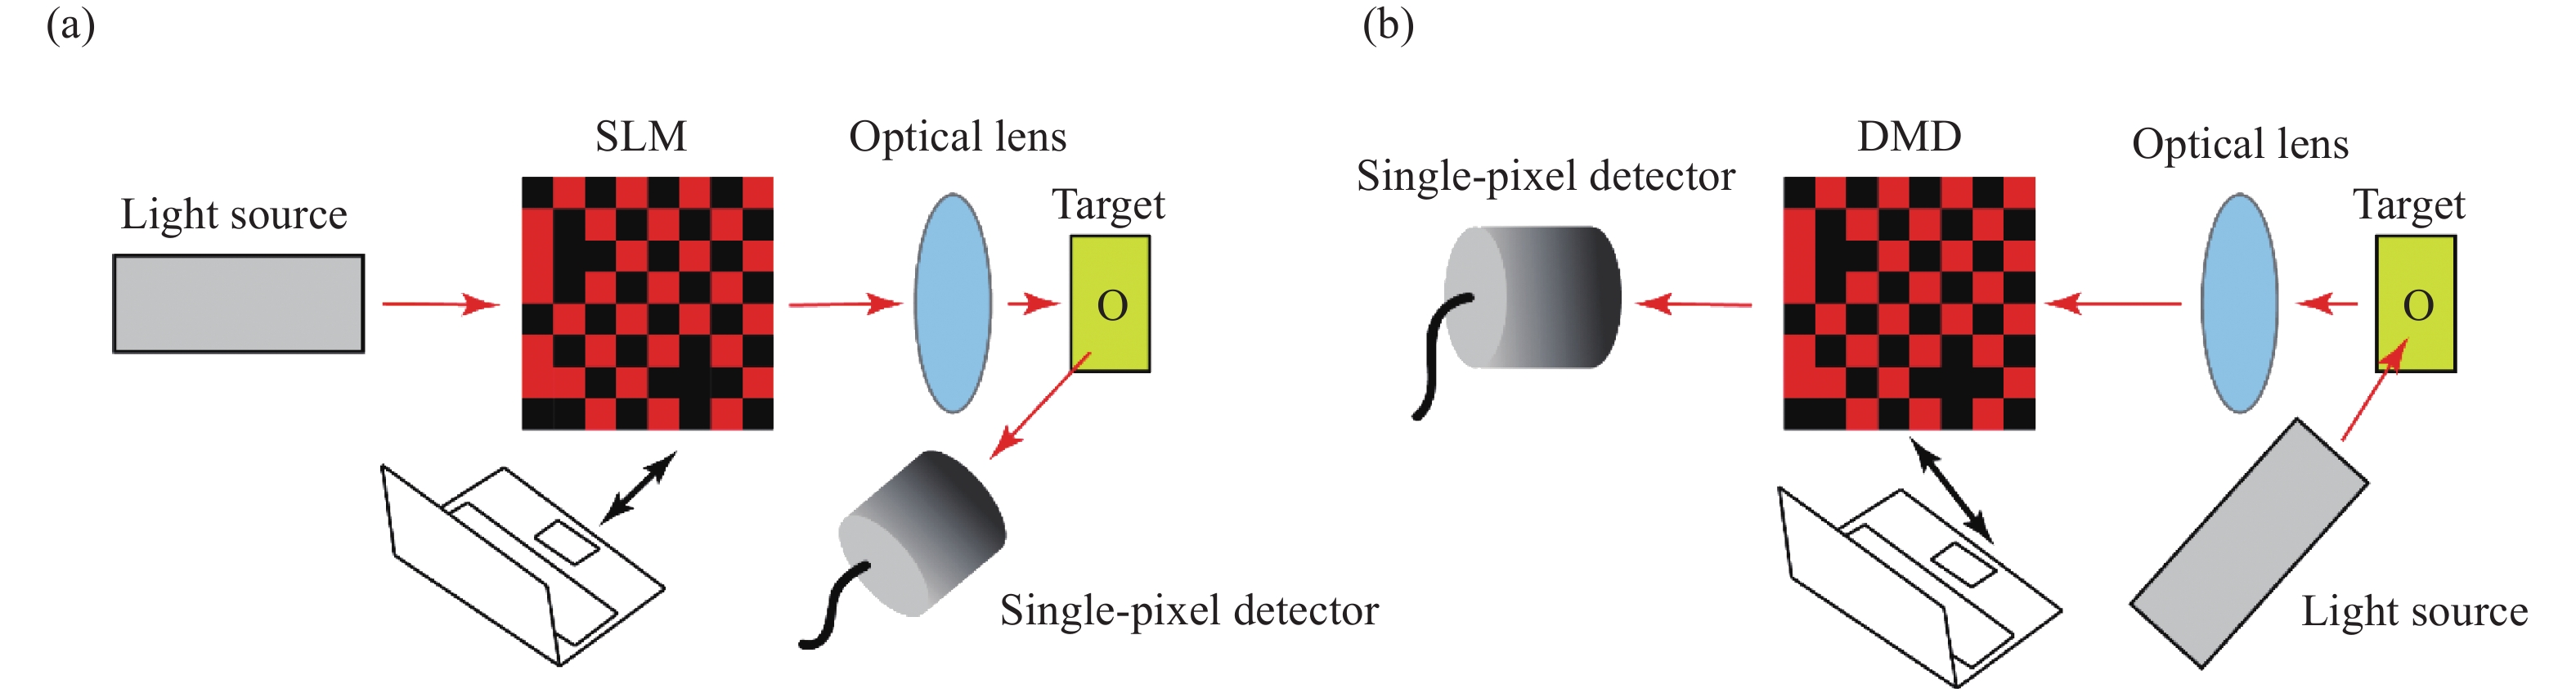 Schematic diagram of (a) computational ghost imaging and (b) single-pixel imaging